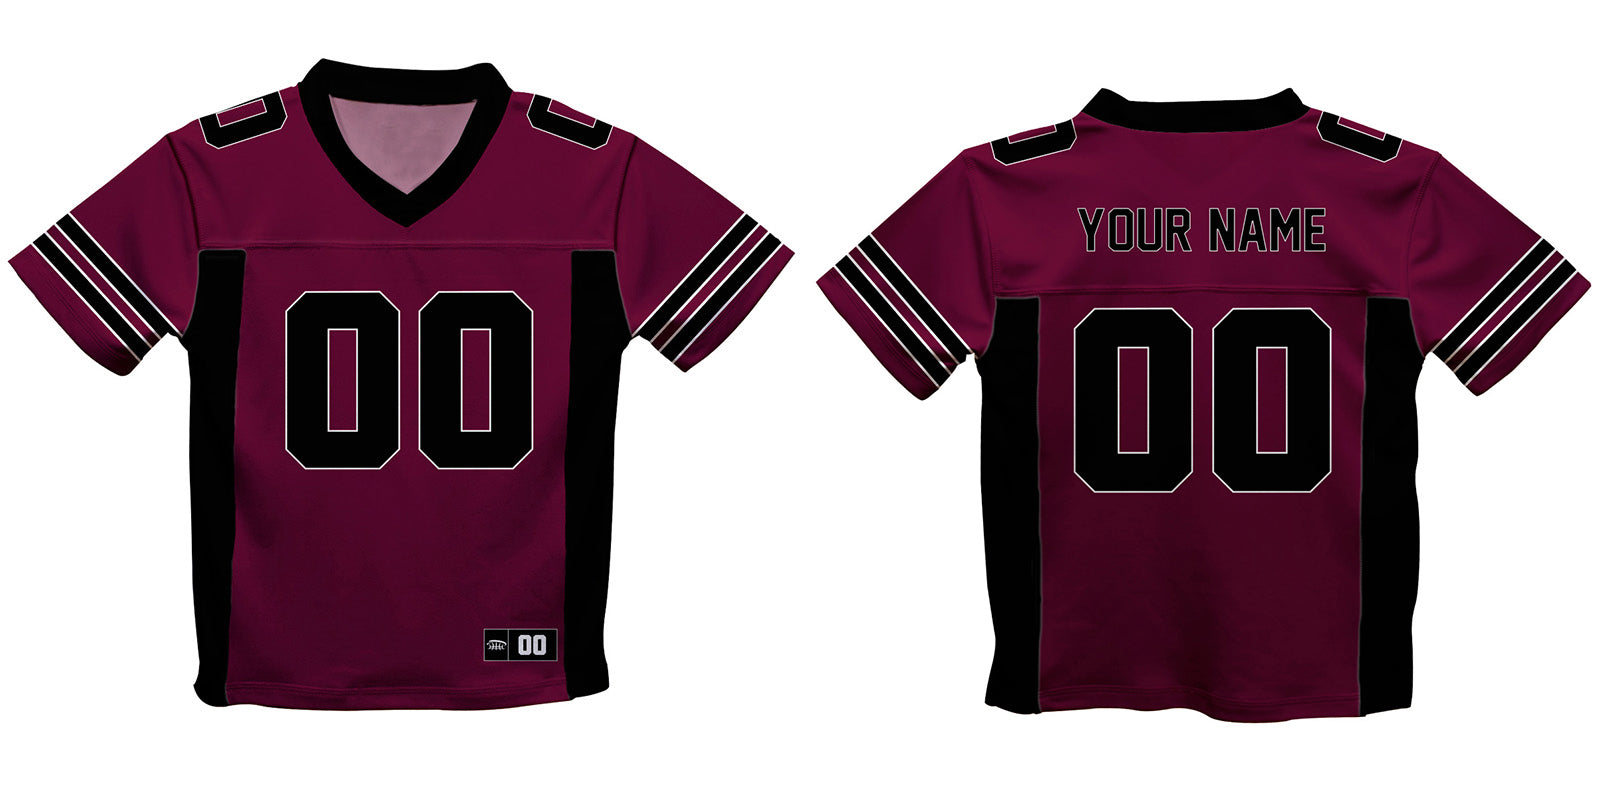 Personalized Name and Number Maroon and Black Fashion Football T-Shirt - Wimziy&Co.